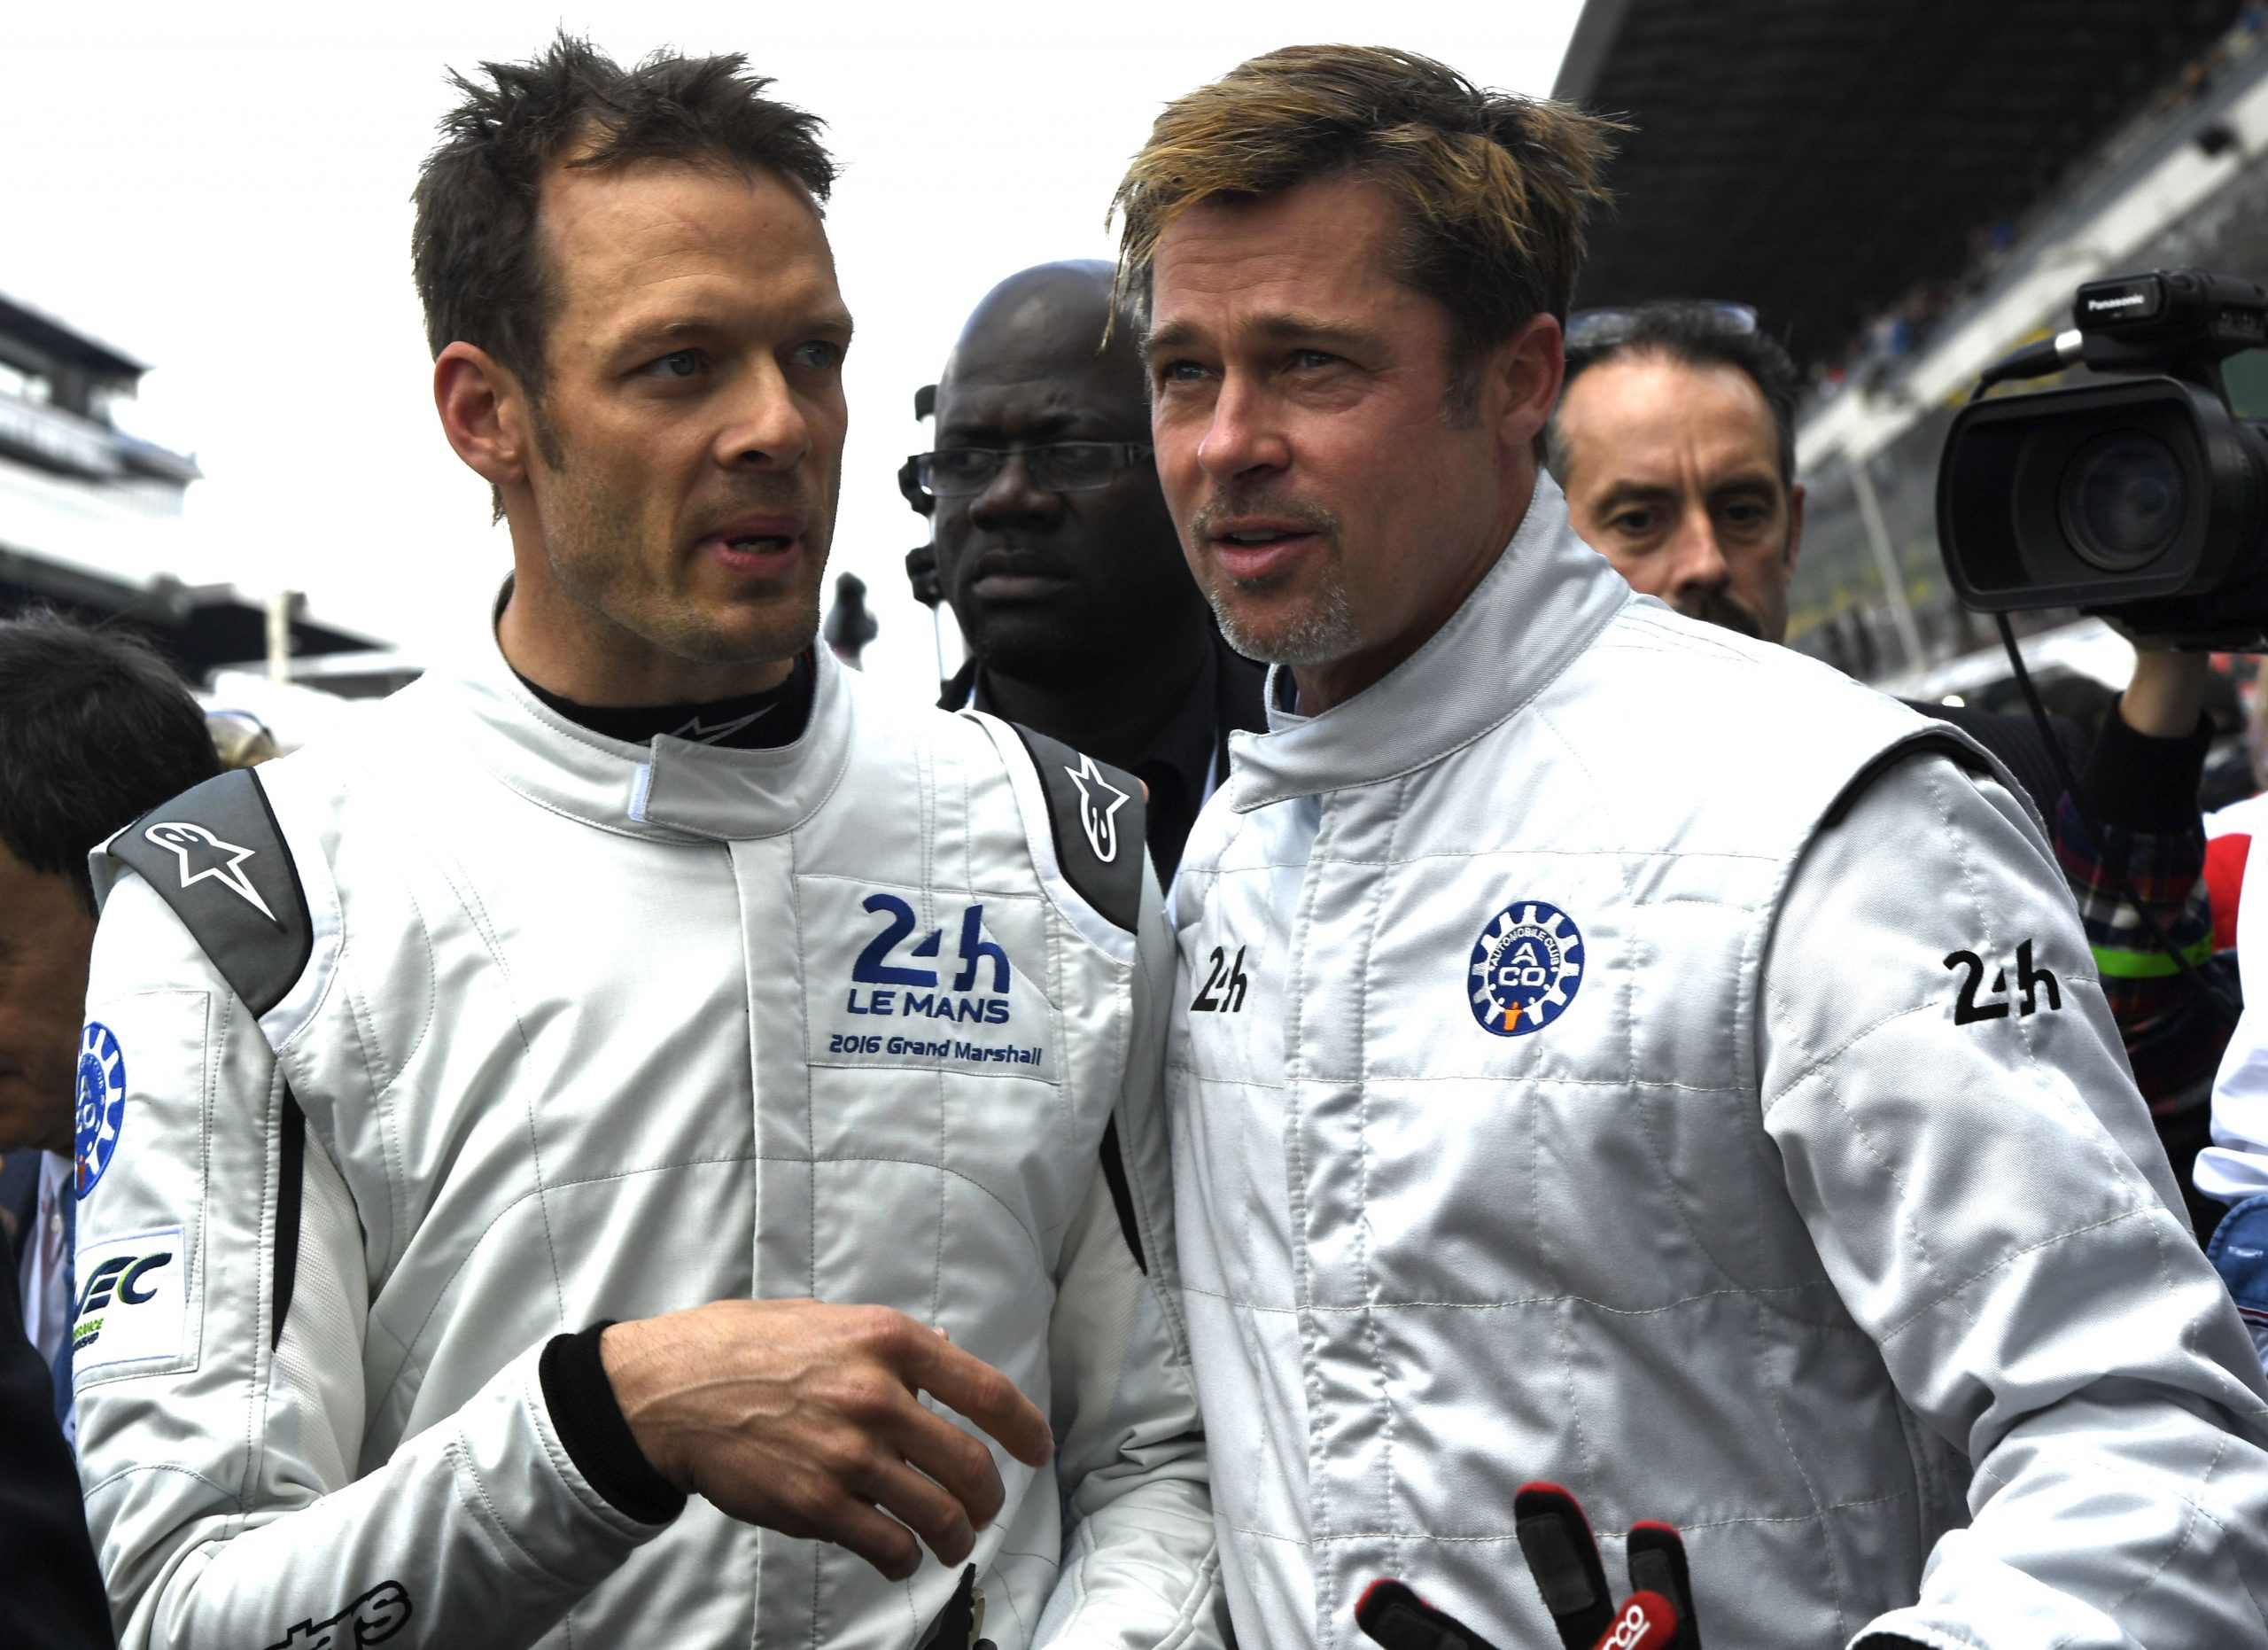 Brad Pitt is Making a Formula 1 Movie and Lewis Hamilton Will be Involved